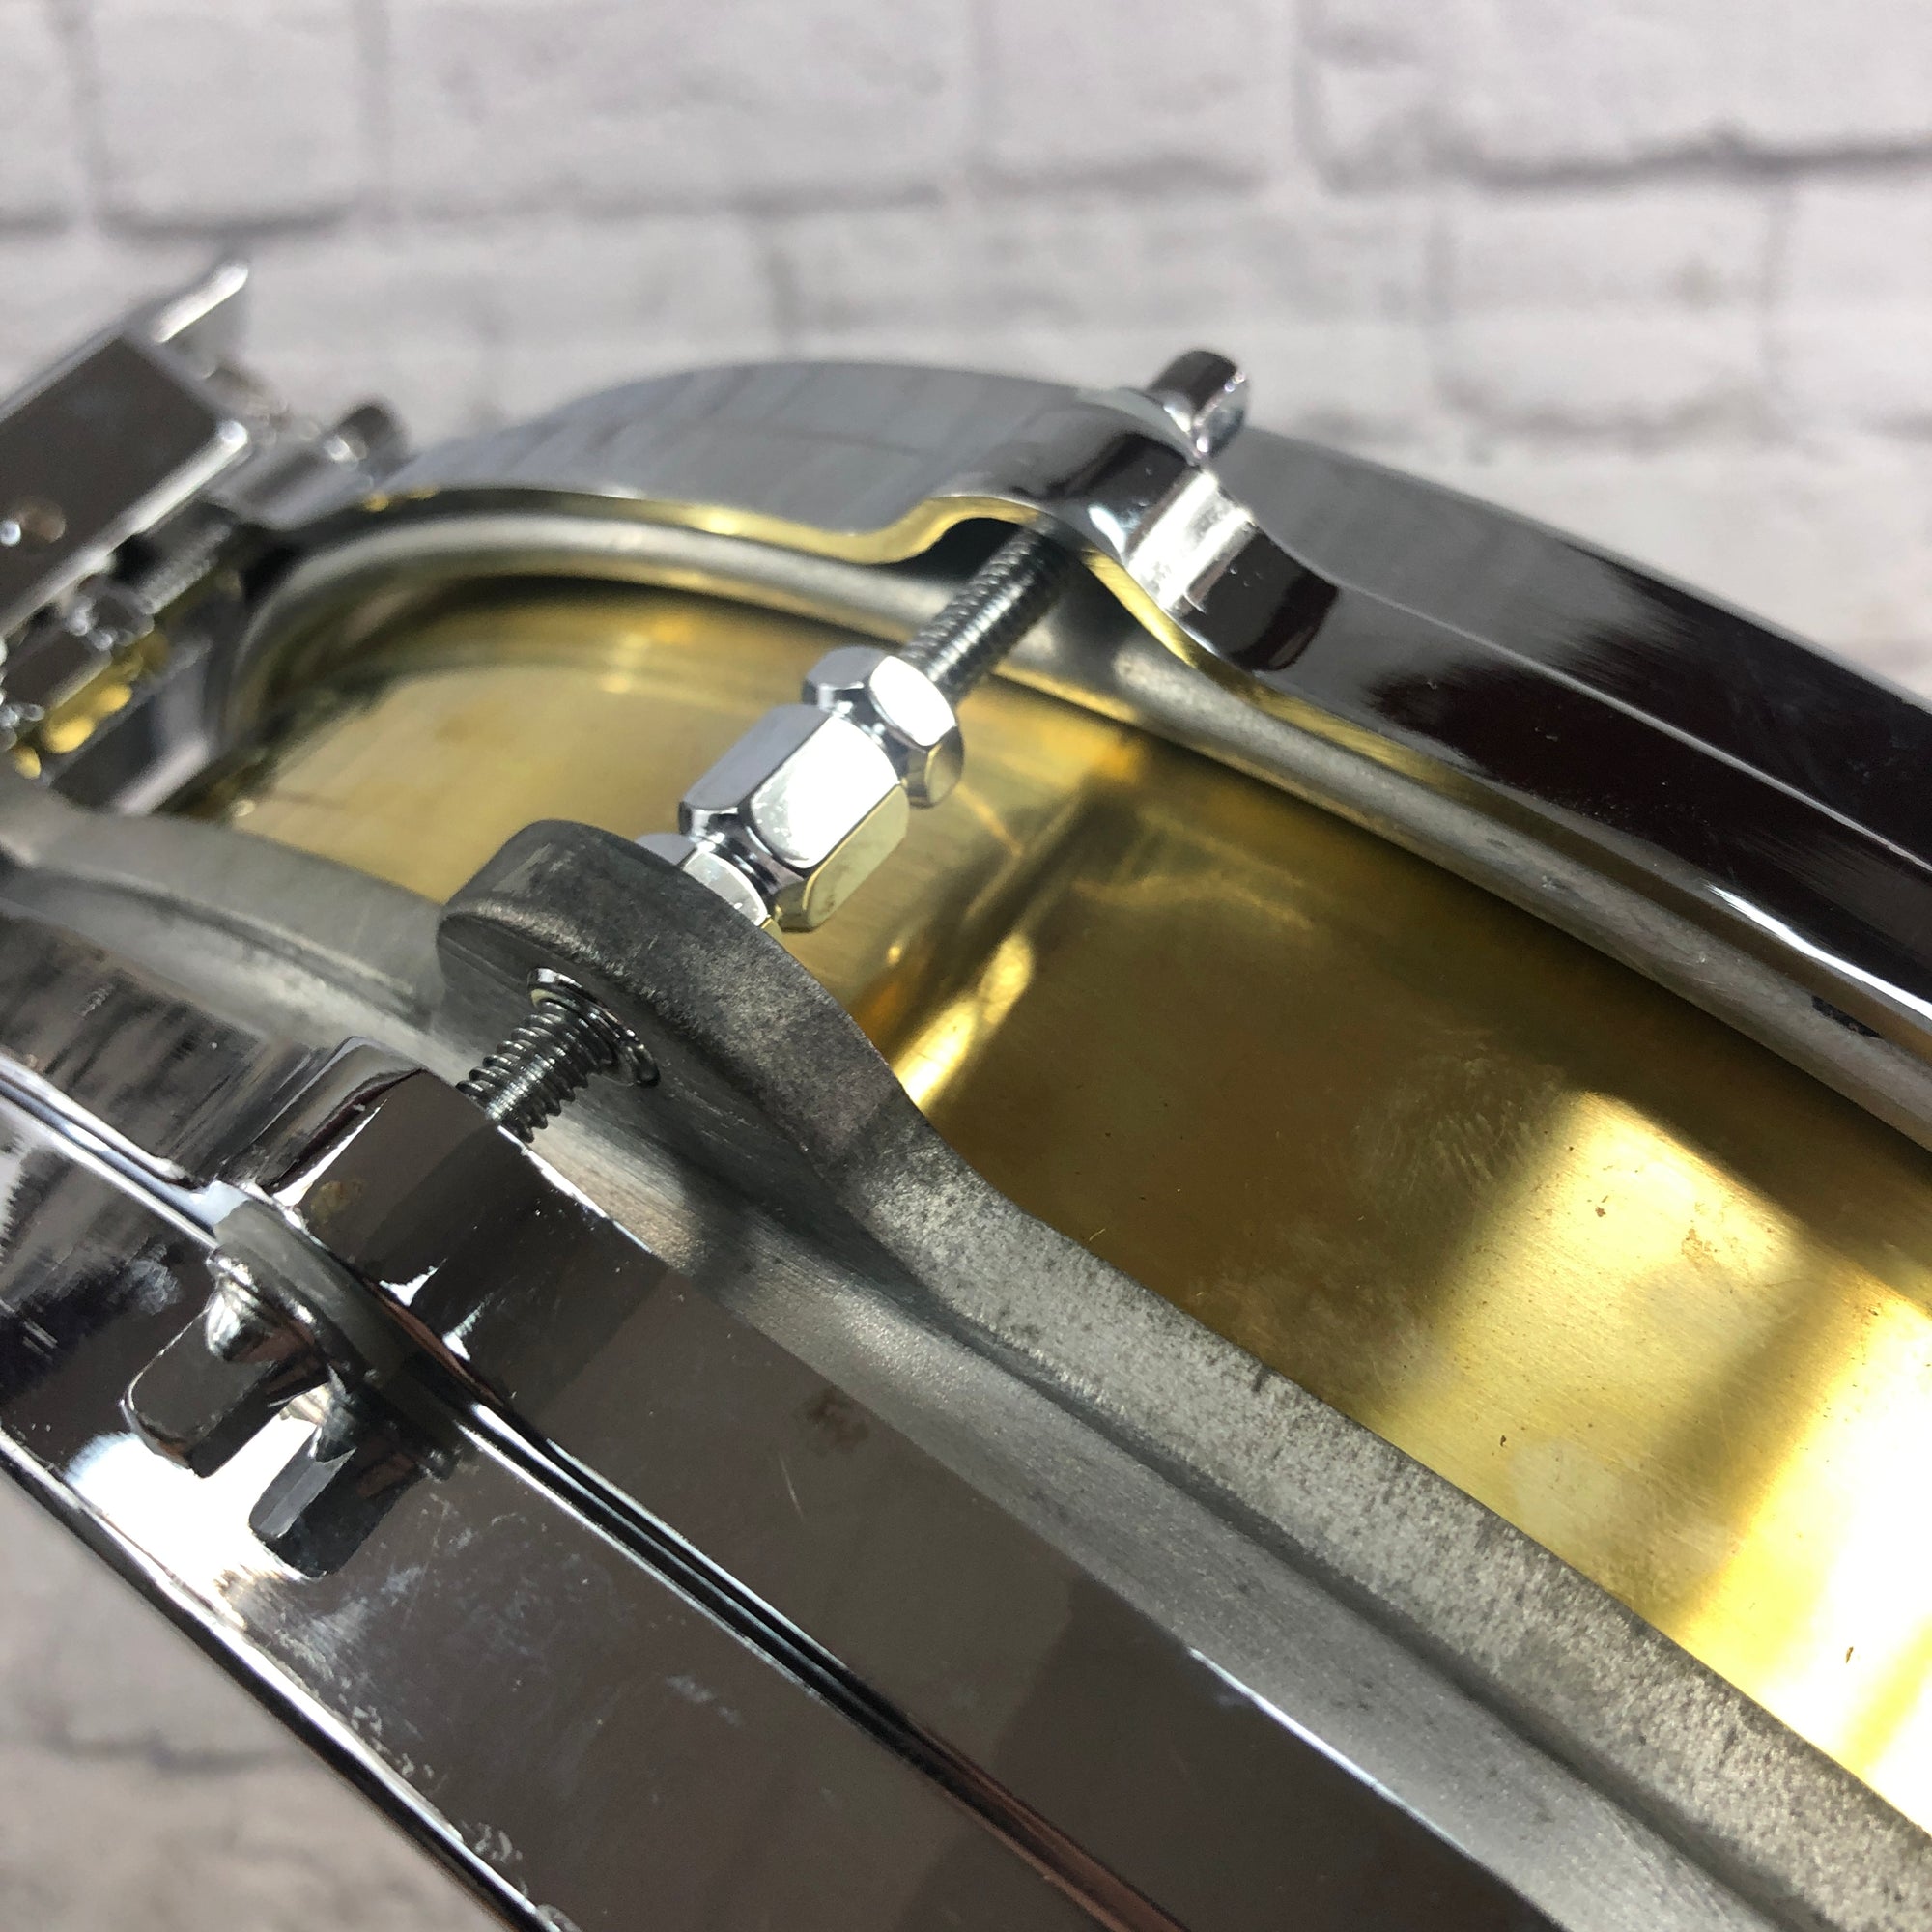 Pearl 14x3 Free Floating Brass Snare Drum 1980s - Evolution Music